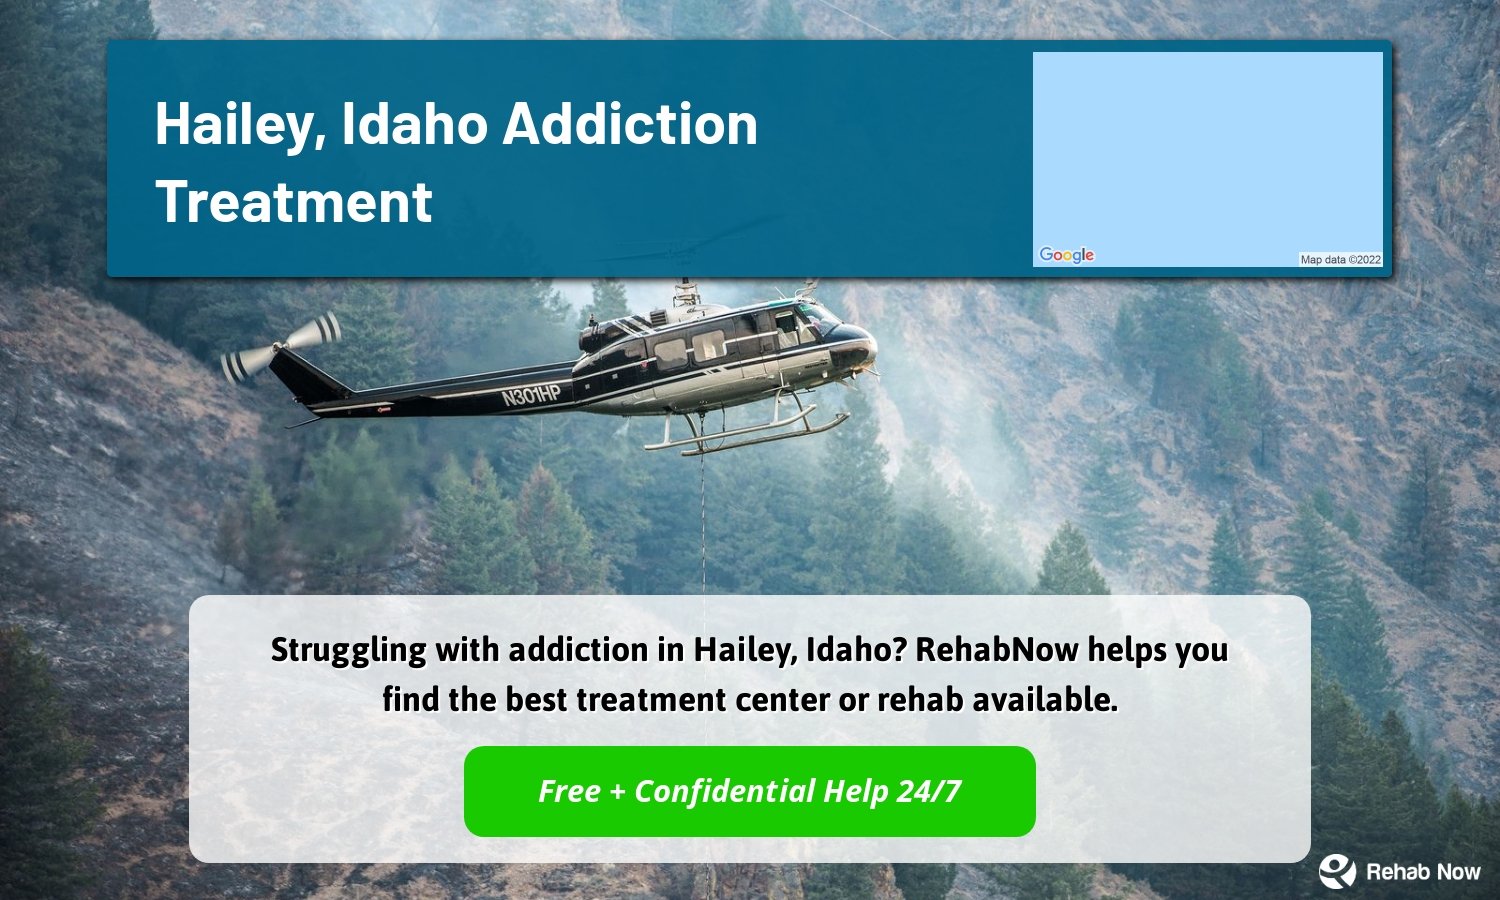 Struggling with addiction in Hailey, Idaho? RehabNow helps you find the best treatment center or rehab available.